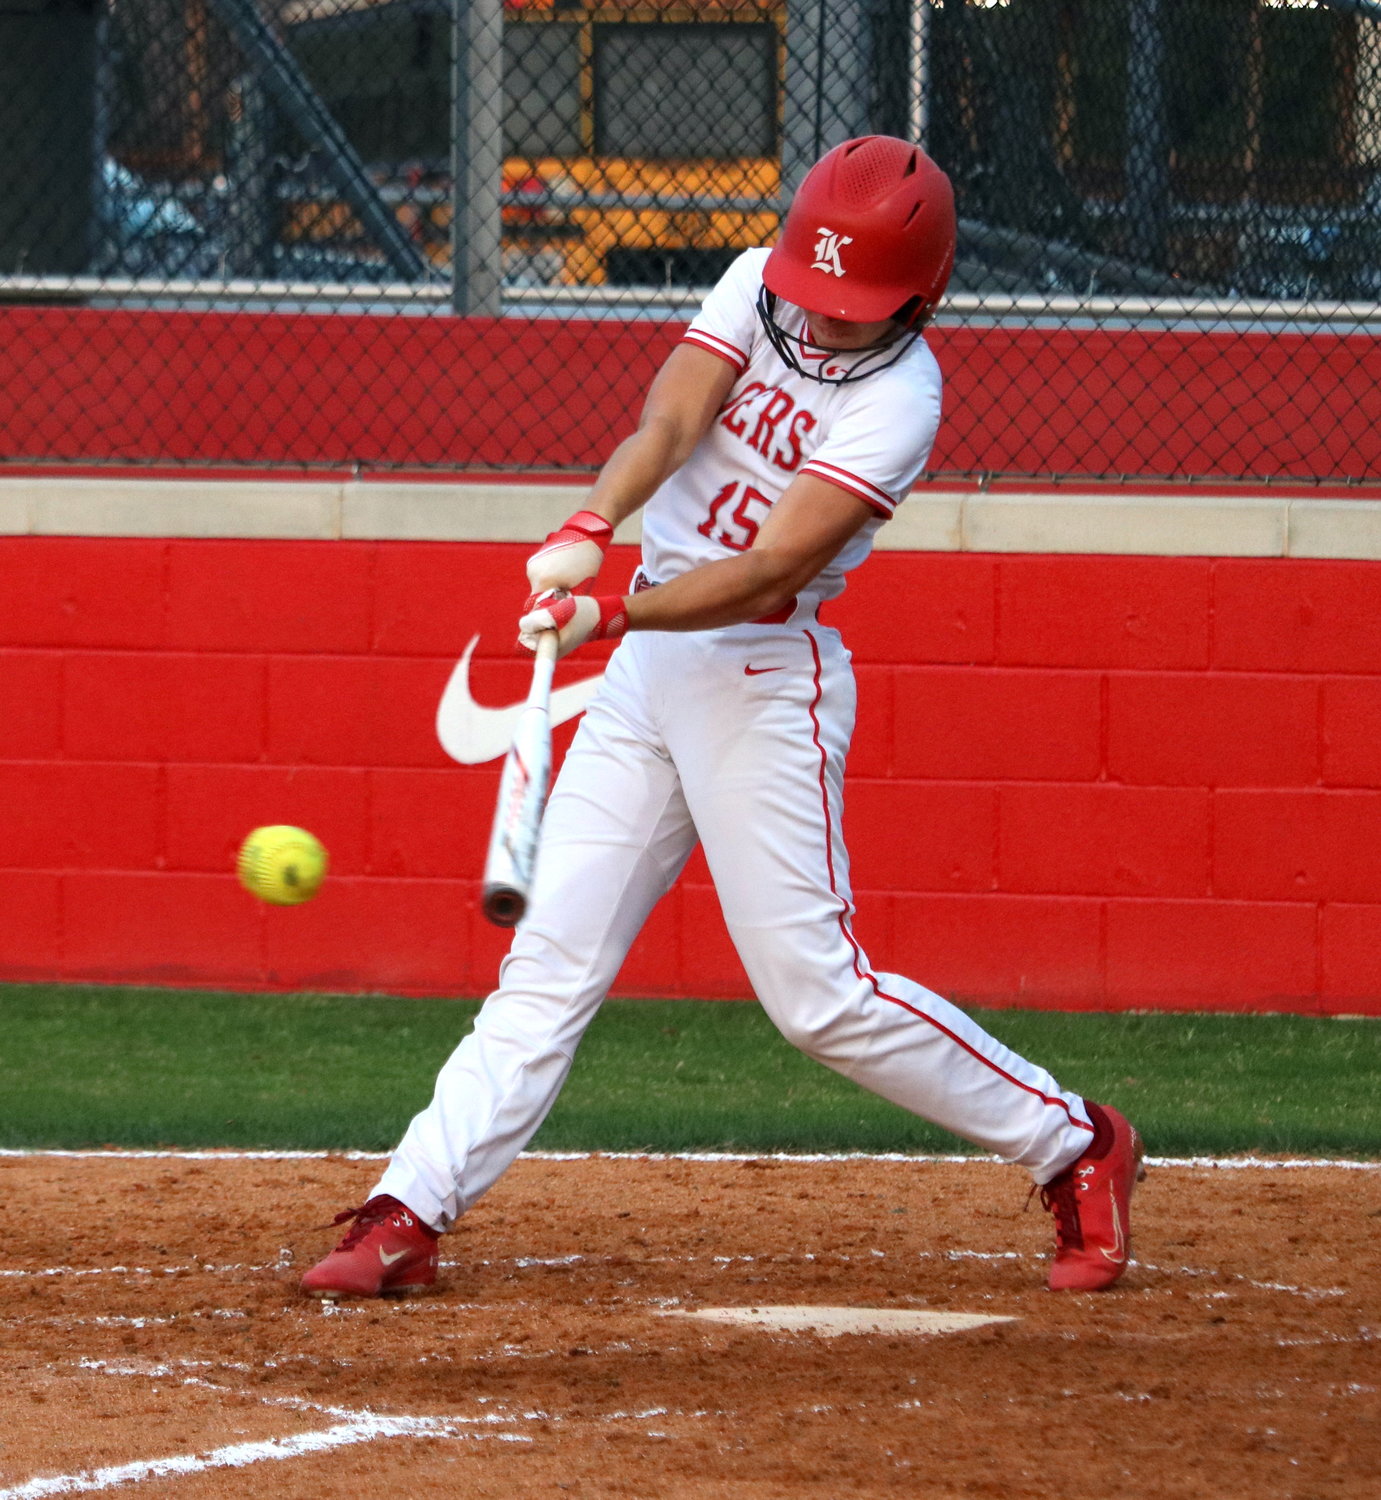 Ashtyn Reichardt hits during Friday's District 19-6A game between Katy and Cinco Ranch at the Katy softball field.